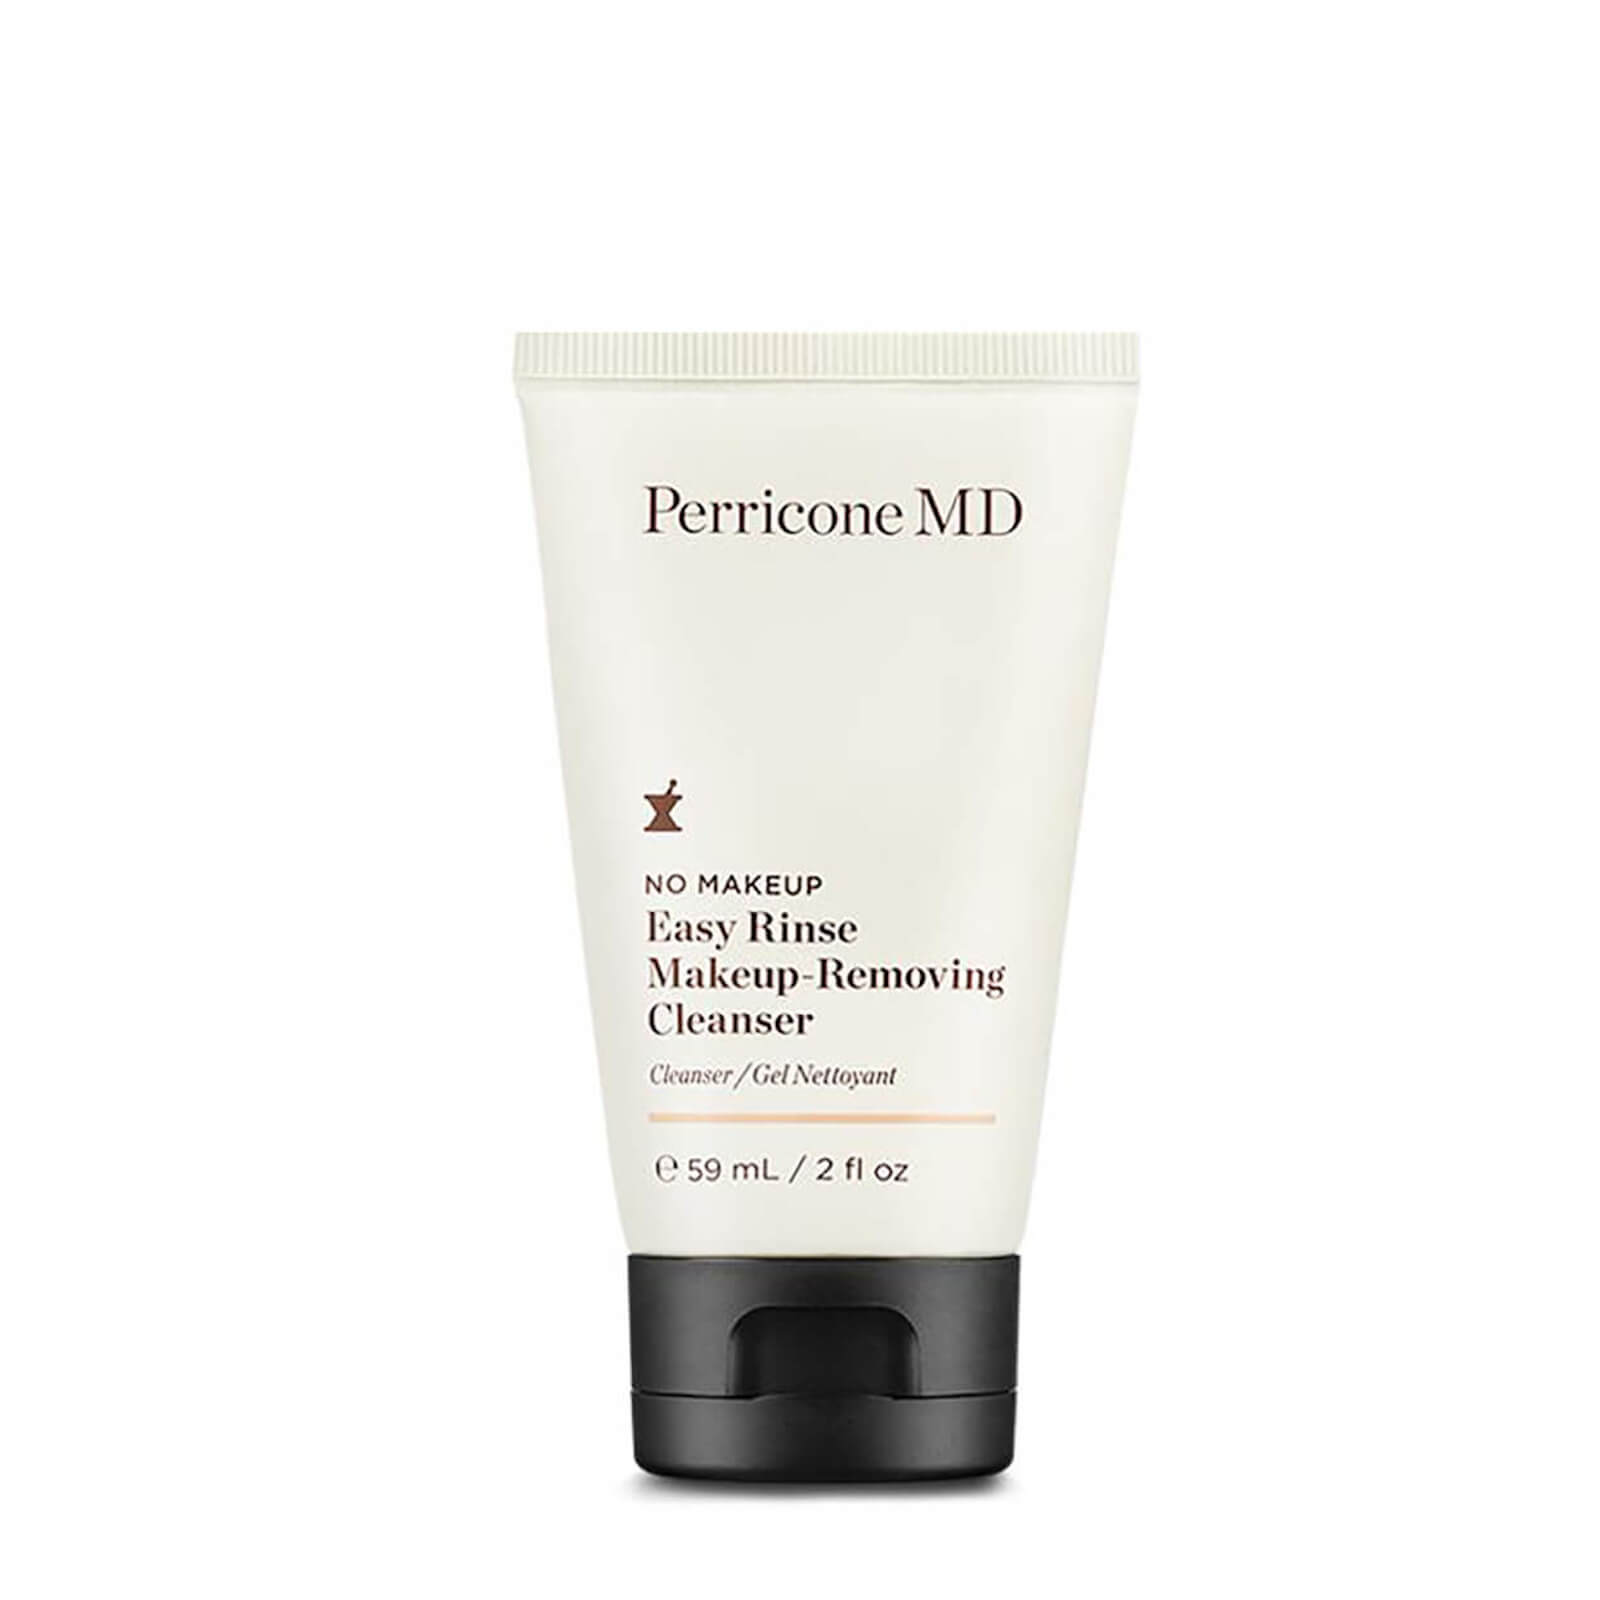 Perricone Md No Makeup Easy Rinse Makeup-removing Cleanser